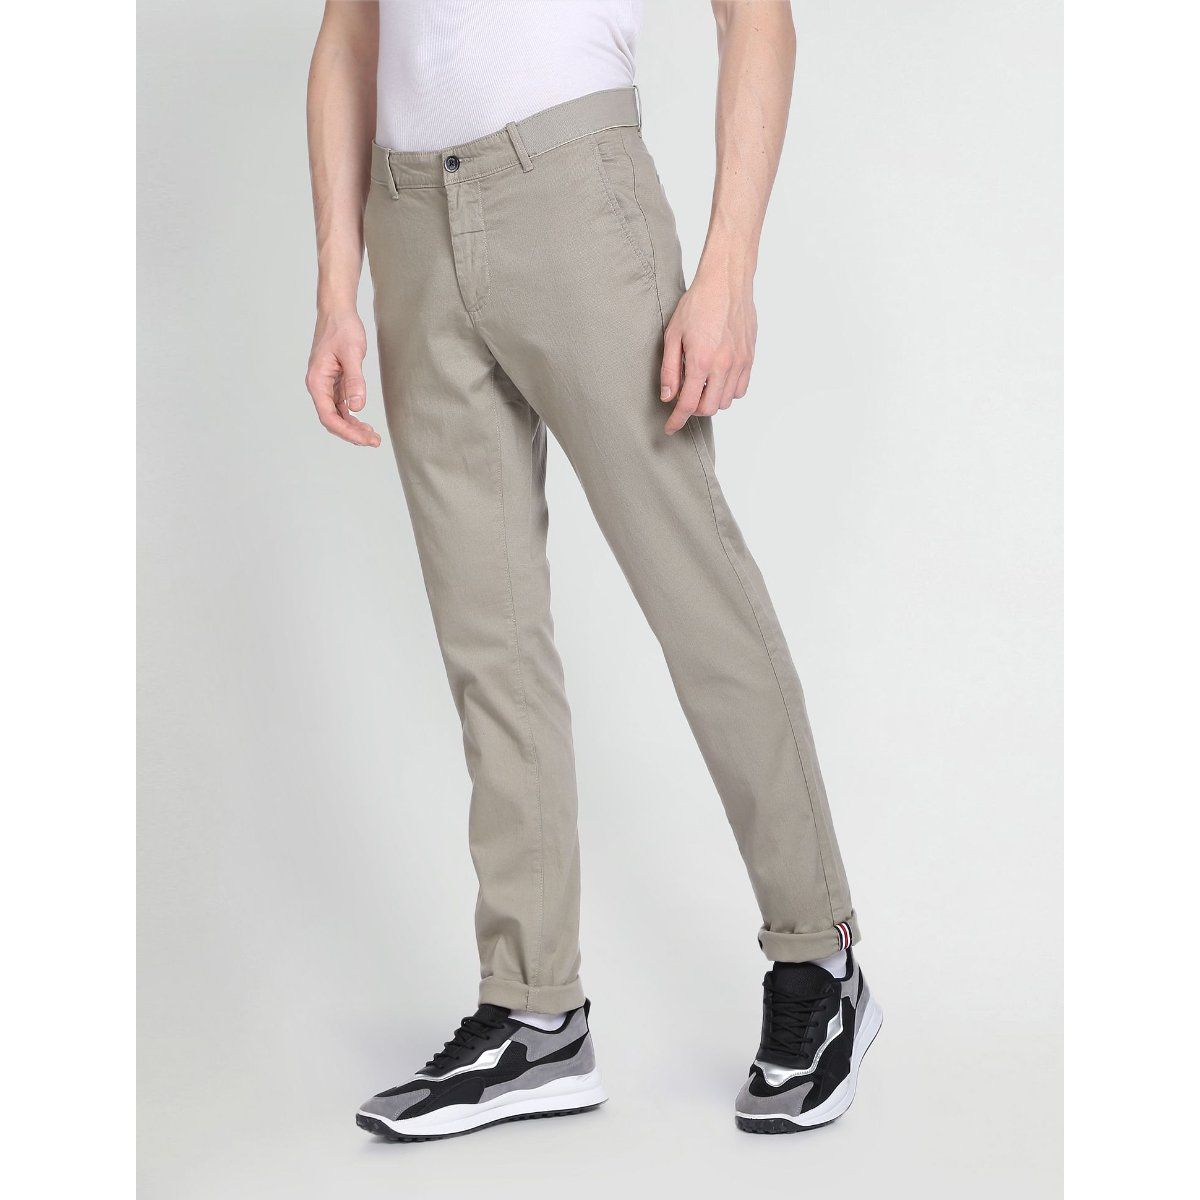 Arrow 1851  If you own just one pair of trousers own it right Find your  fit with the Arrow Autoflex Trousers  a pair of trousers with concealed  elasticized waist band